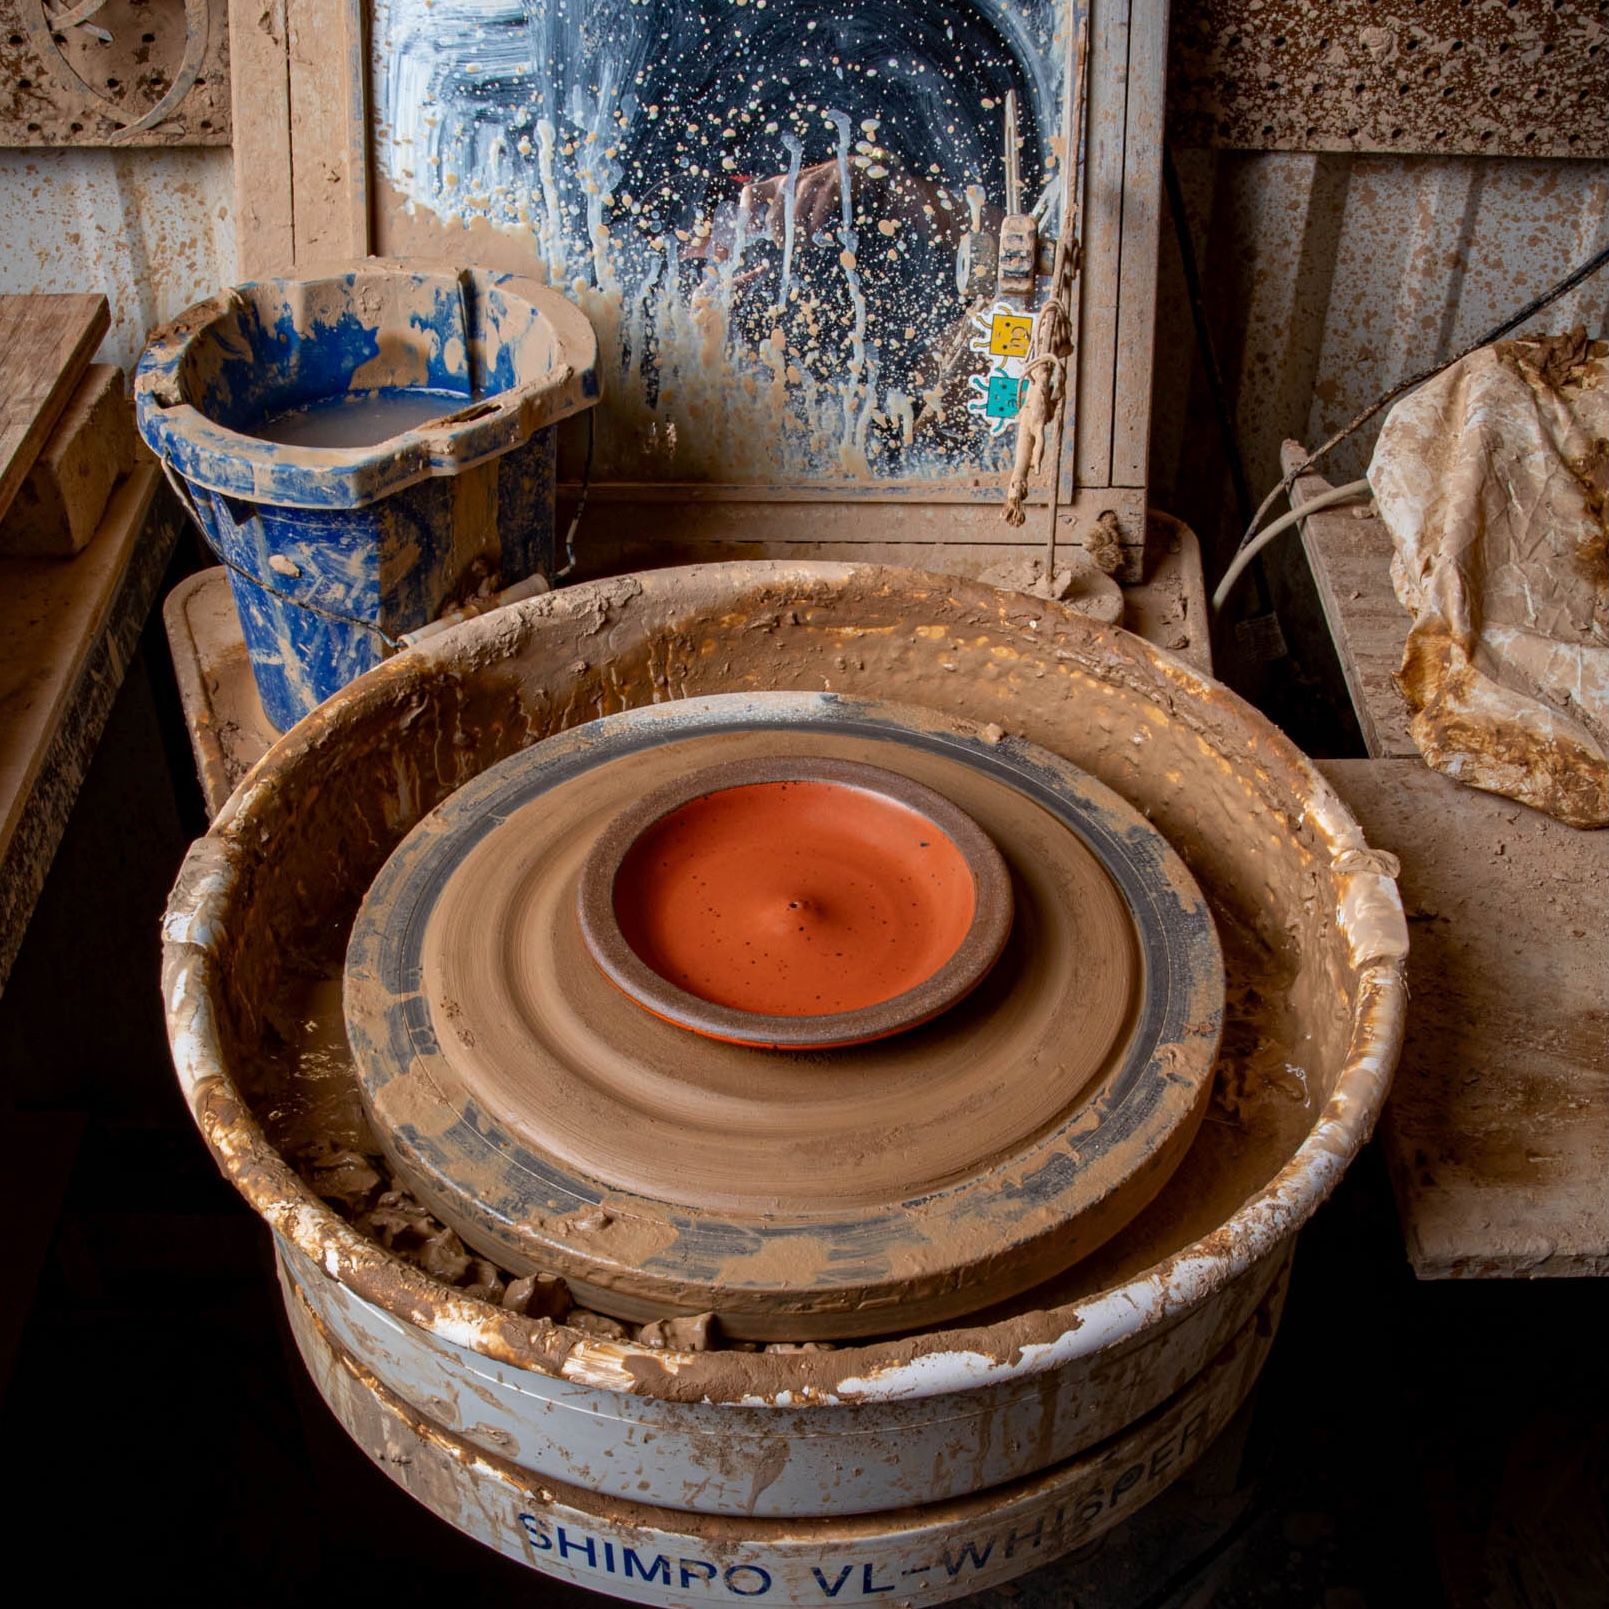 In a pottery studio setting and on a potter's wheel sits an orange plate-shaped incense holder with an unglazed rim featuring iron speckles.